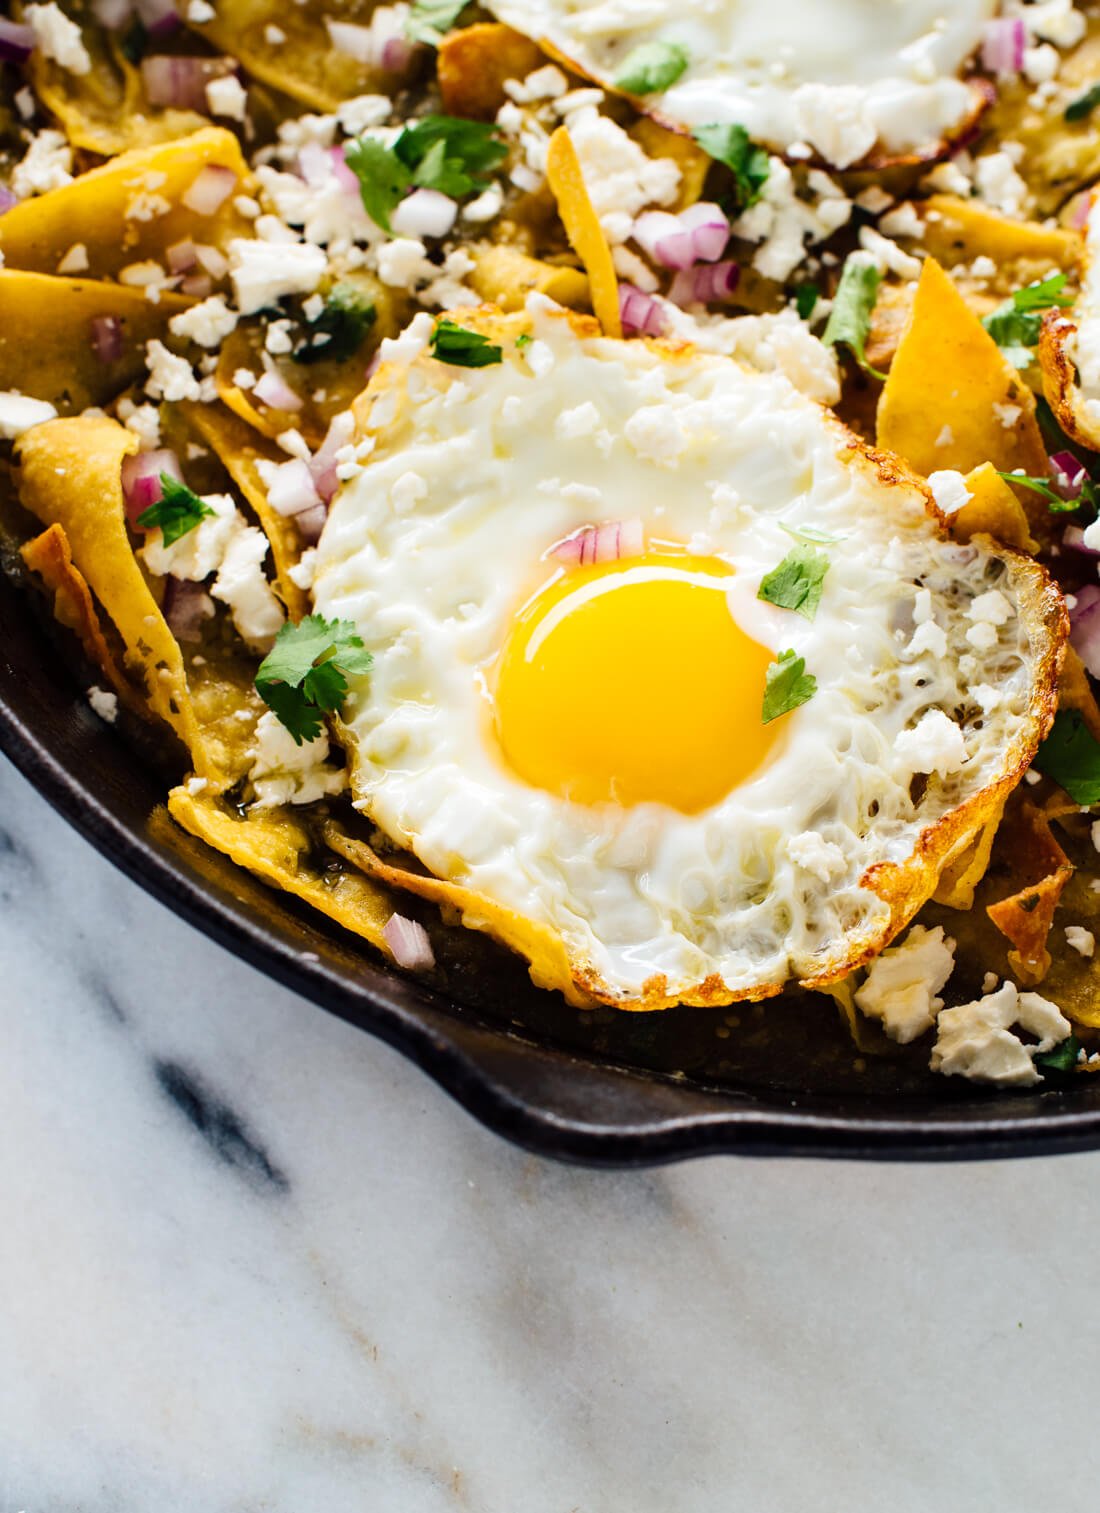 DELICIOUS chilaquiles recipe with salsa verde instead of red sauce! This is a fantastic breakfast, brunch or dinner. cookieandkate.com